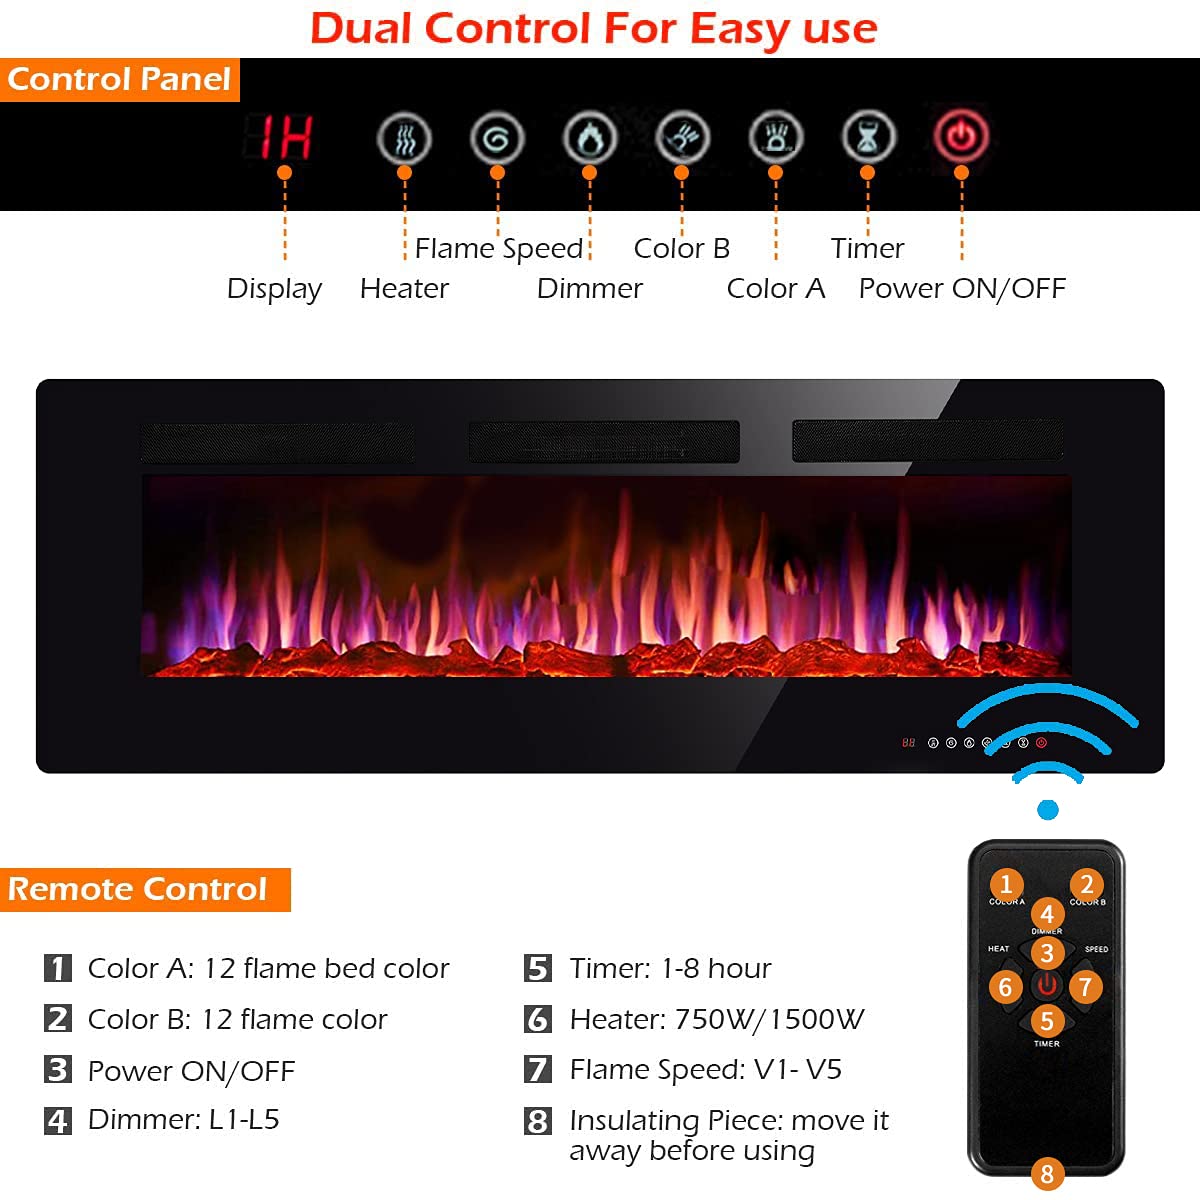 60 inch Electric Fireplace Wall Mounted Led Wall Fireplace Drifting Fireplace Recessed Electric Fireplace Inserts, Adjustable Flame Color Electric Fireplace